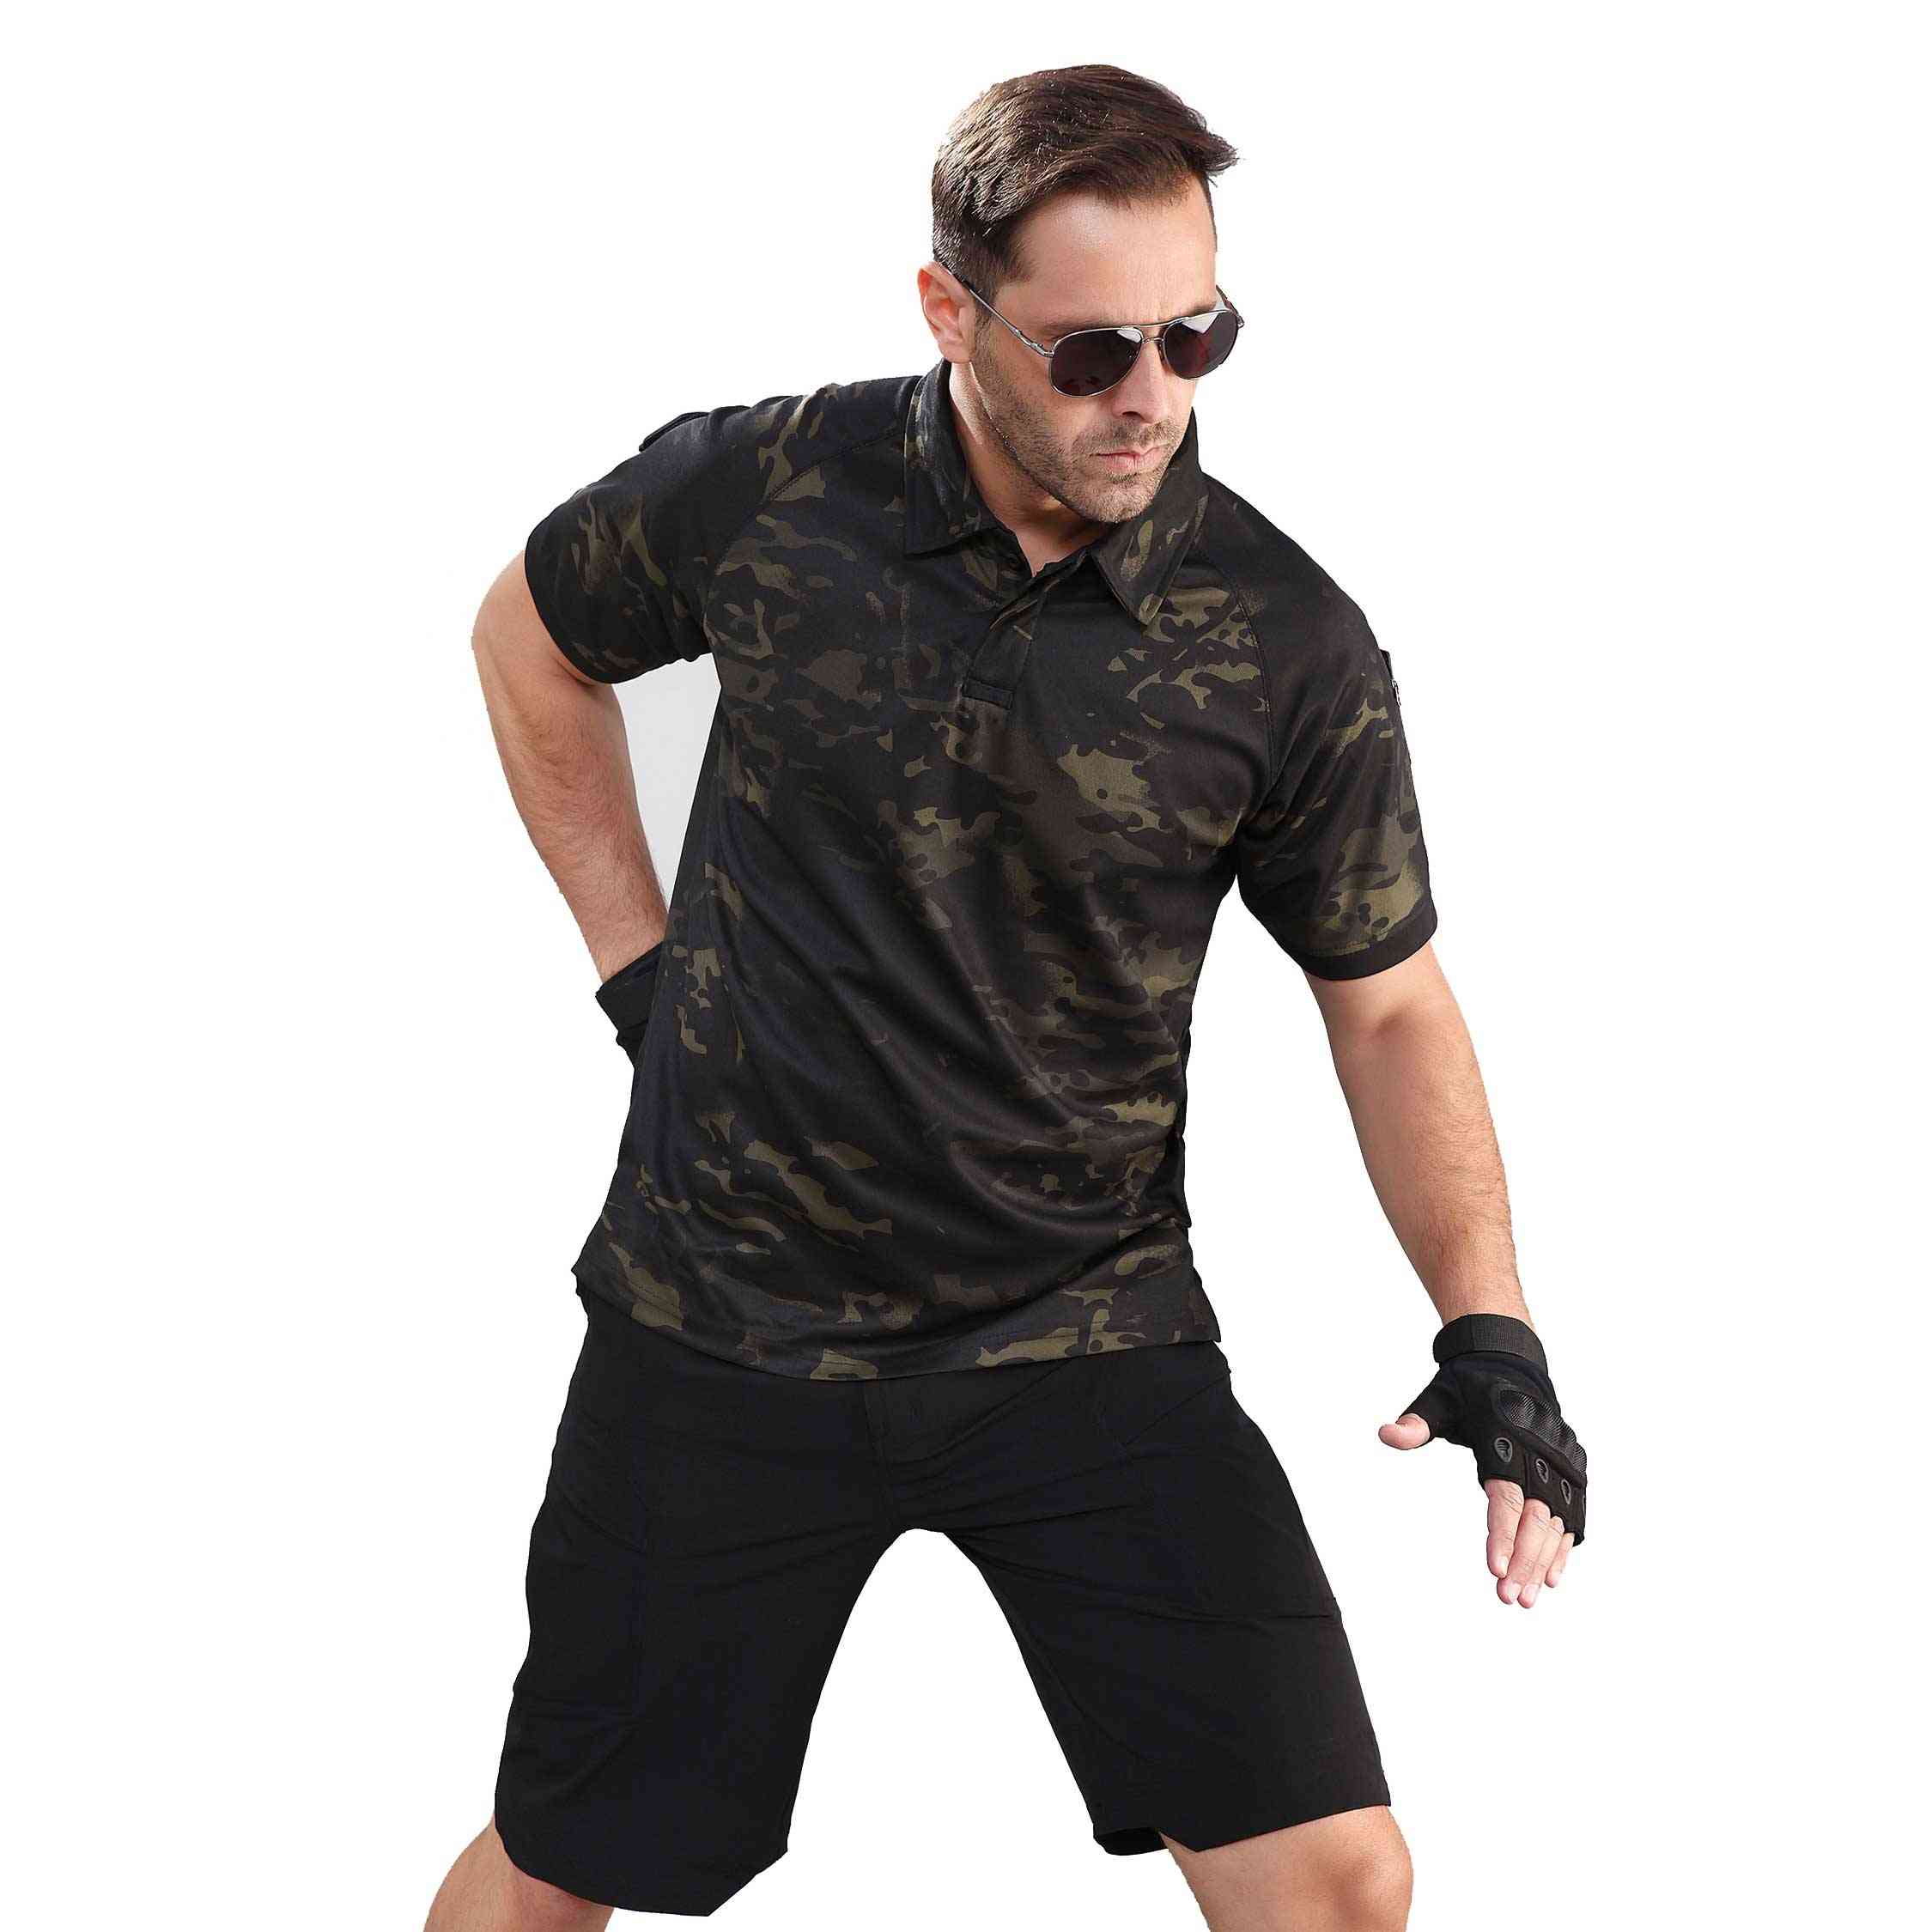 Outdoor Sports Camouflage T-shirt